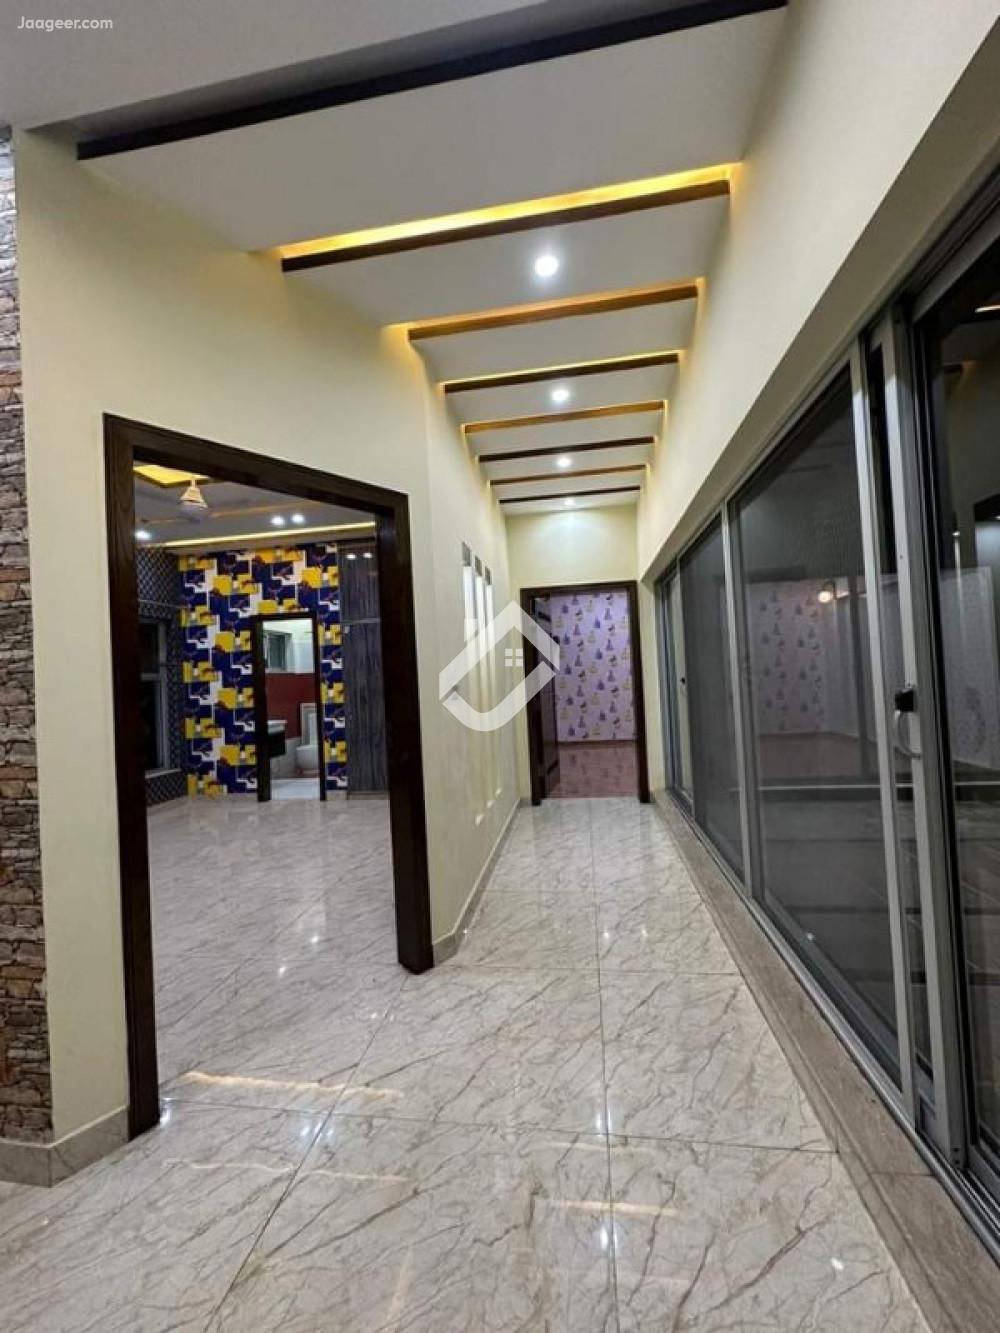 Main image 10 Marla Double Storey House For Sale In DHA Phase 5  DHA Phase 5, Lahore